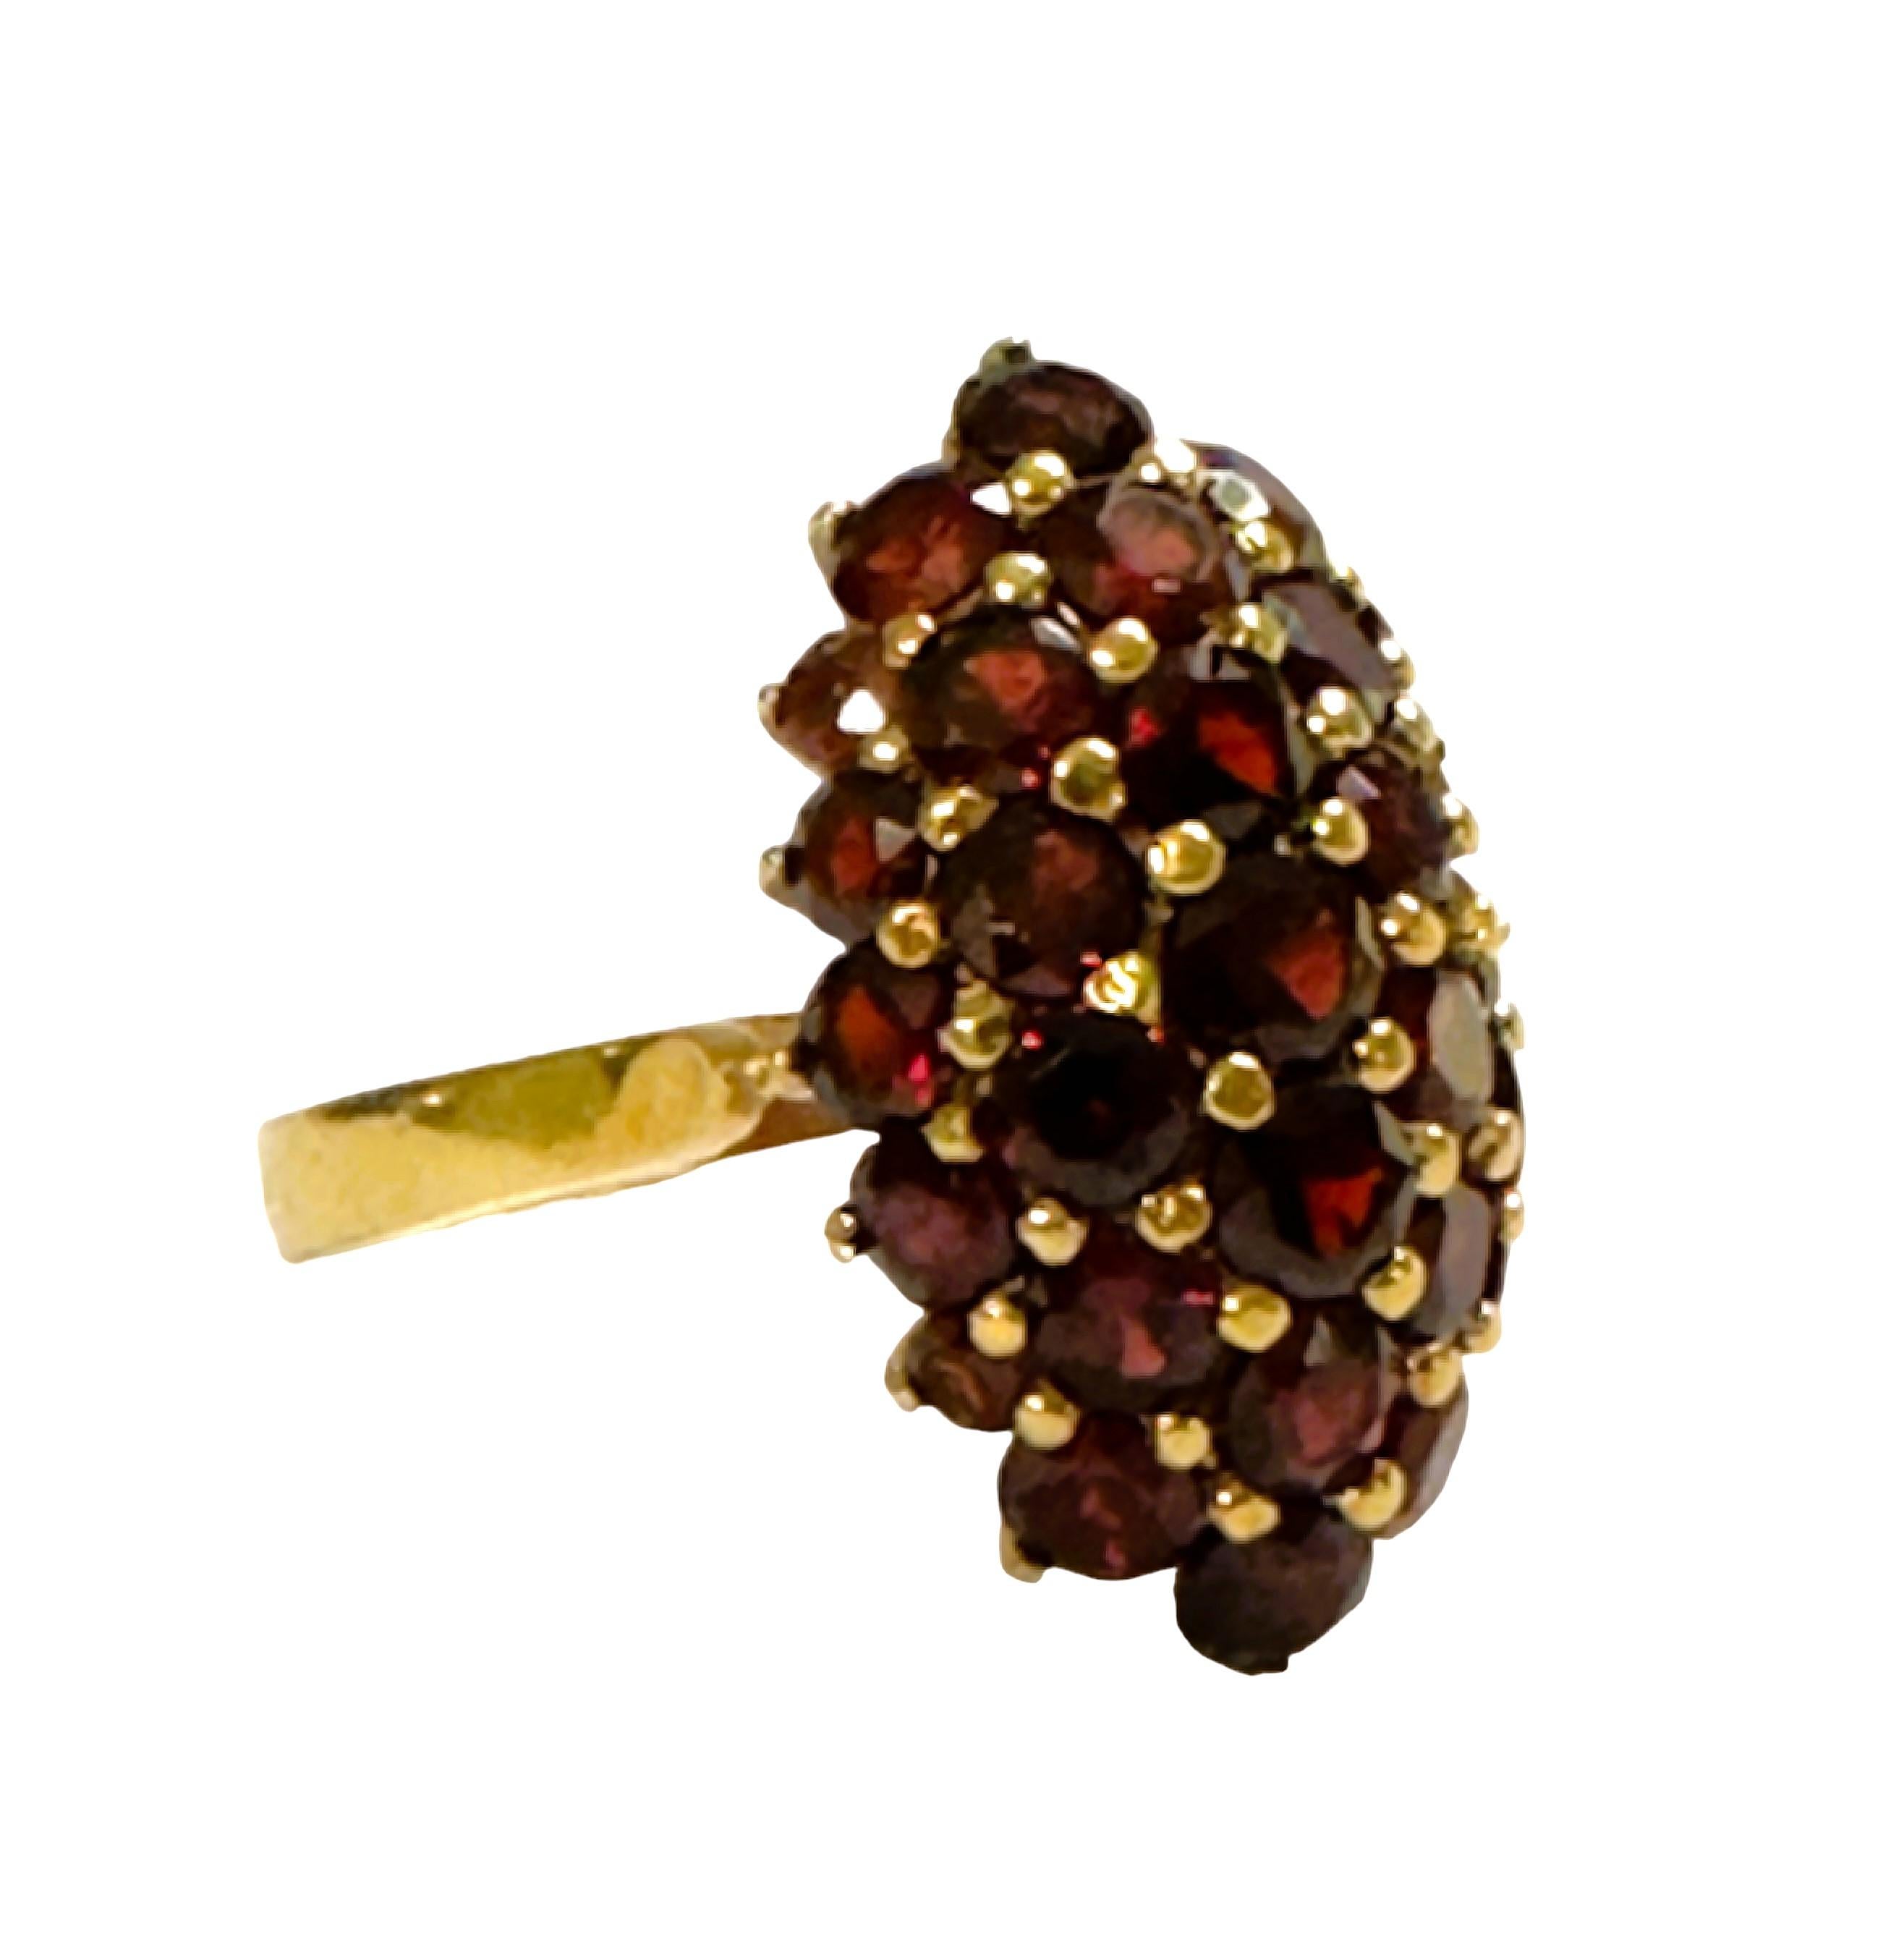 What a cool and unique ring. The Ring is a size 6.5.  Total weight in grams is 6.56.   It has 31 Garnets totaling 3 carats.  Each stone measures between 2 and 3 mm.  The ring is marked 